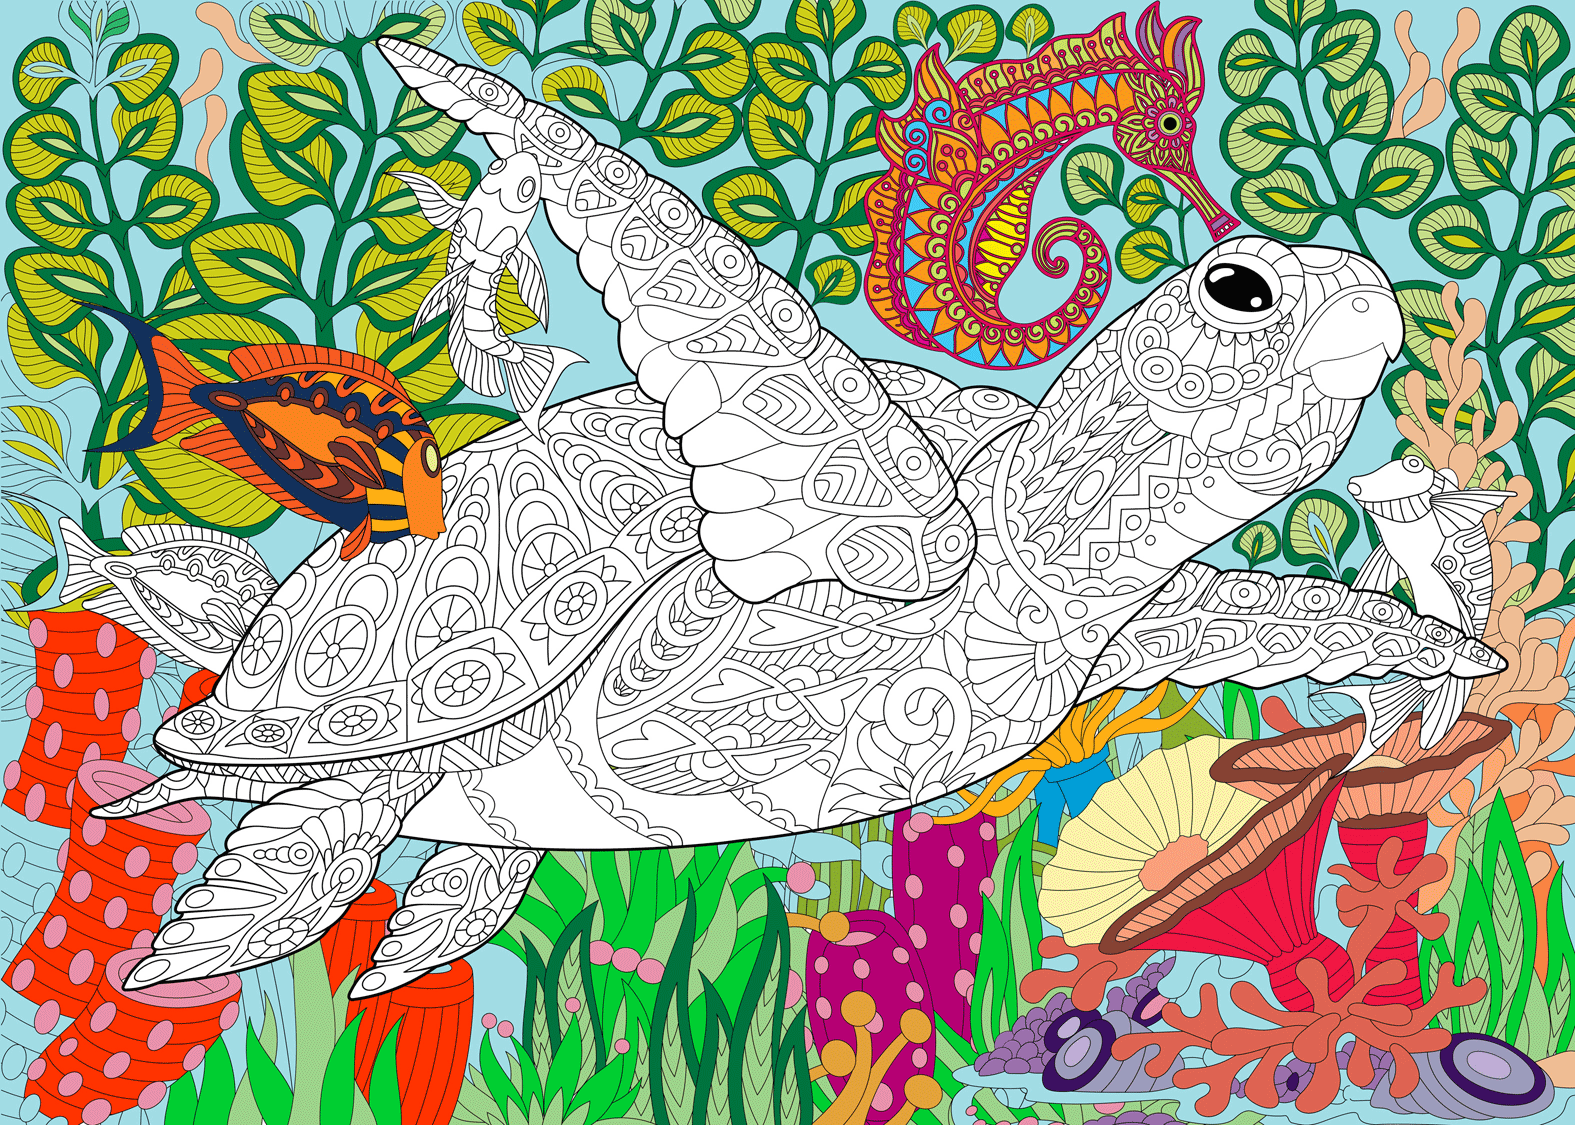 Buy superb sea turtle coloring posters from sjprinter store